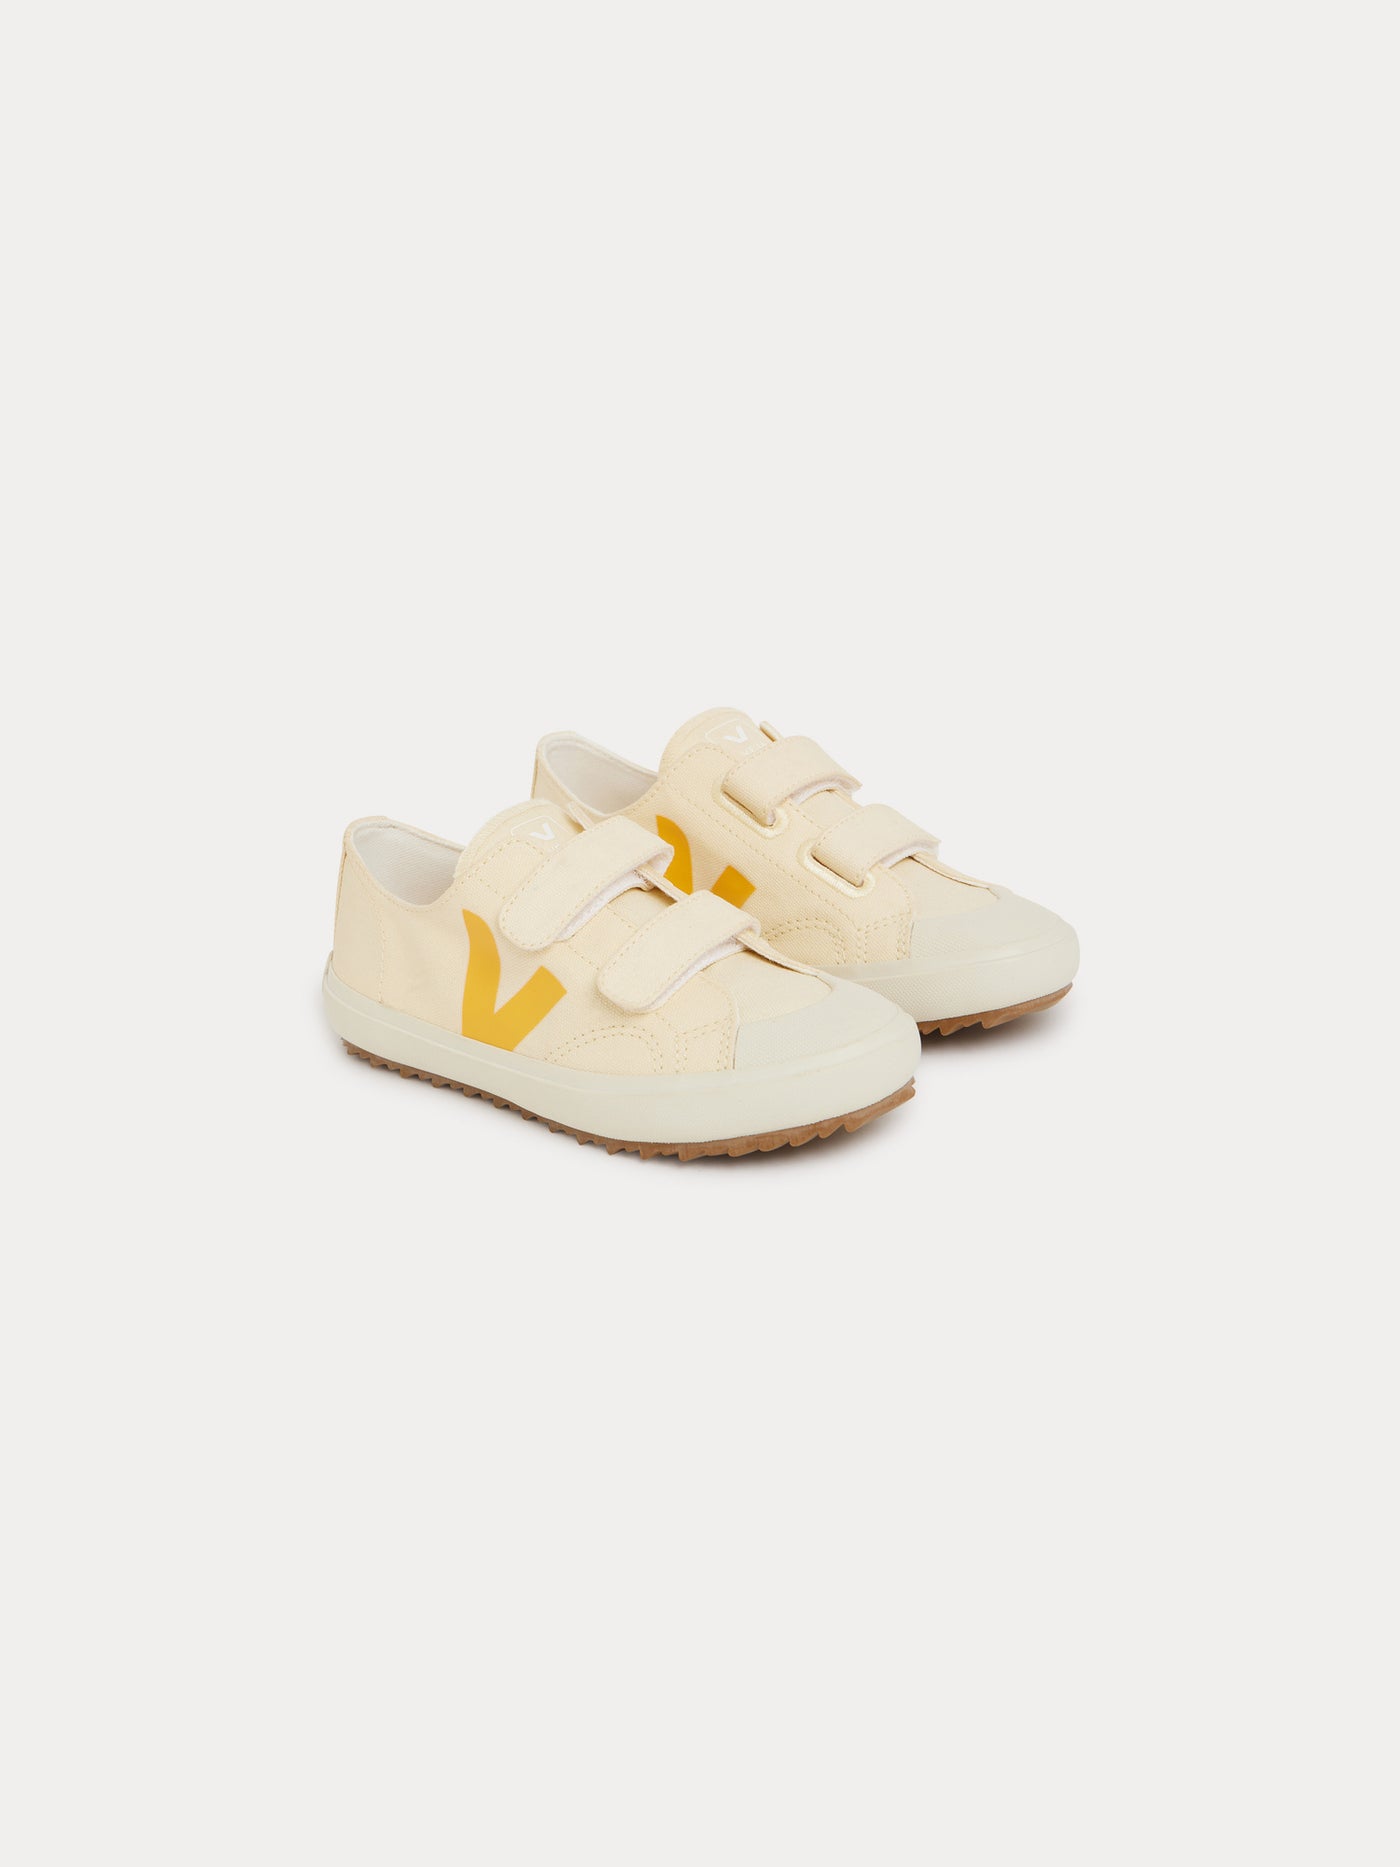 Bonpoint x Veja Ollie Sneakers IVORY